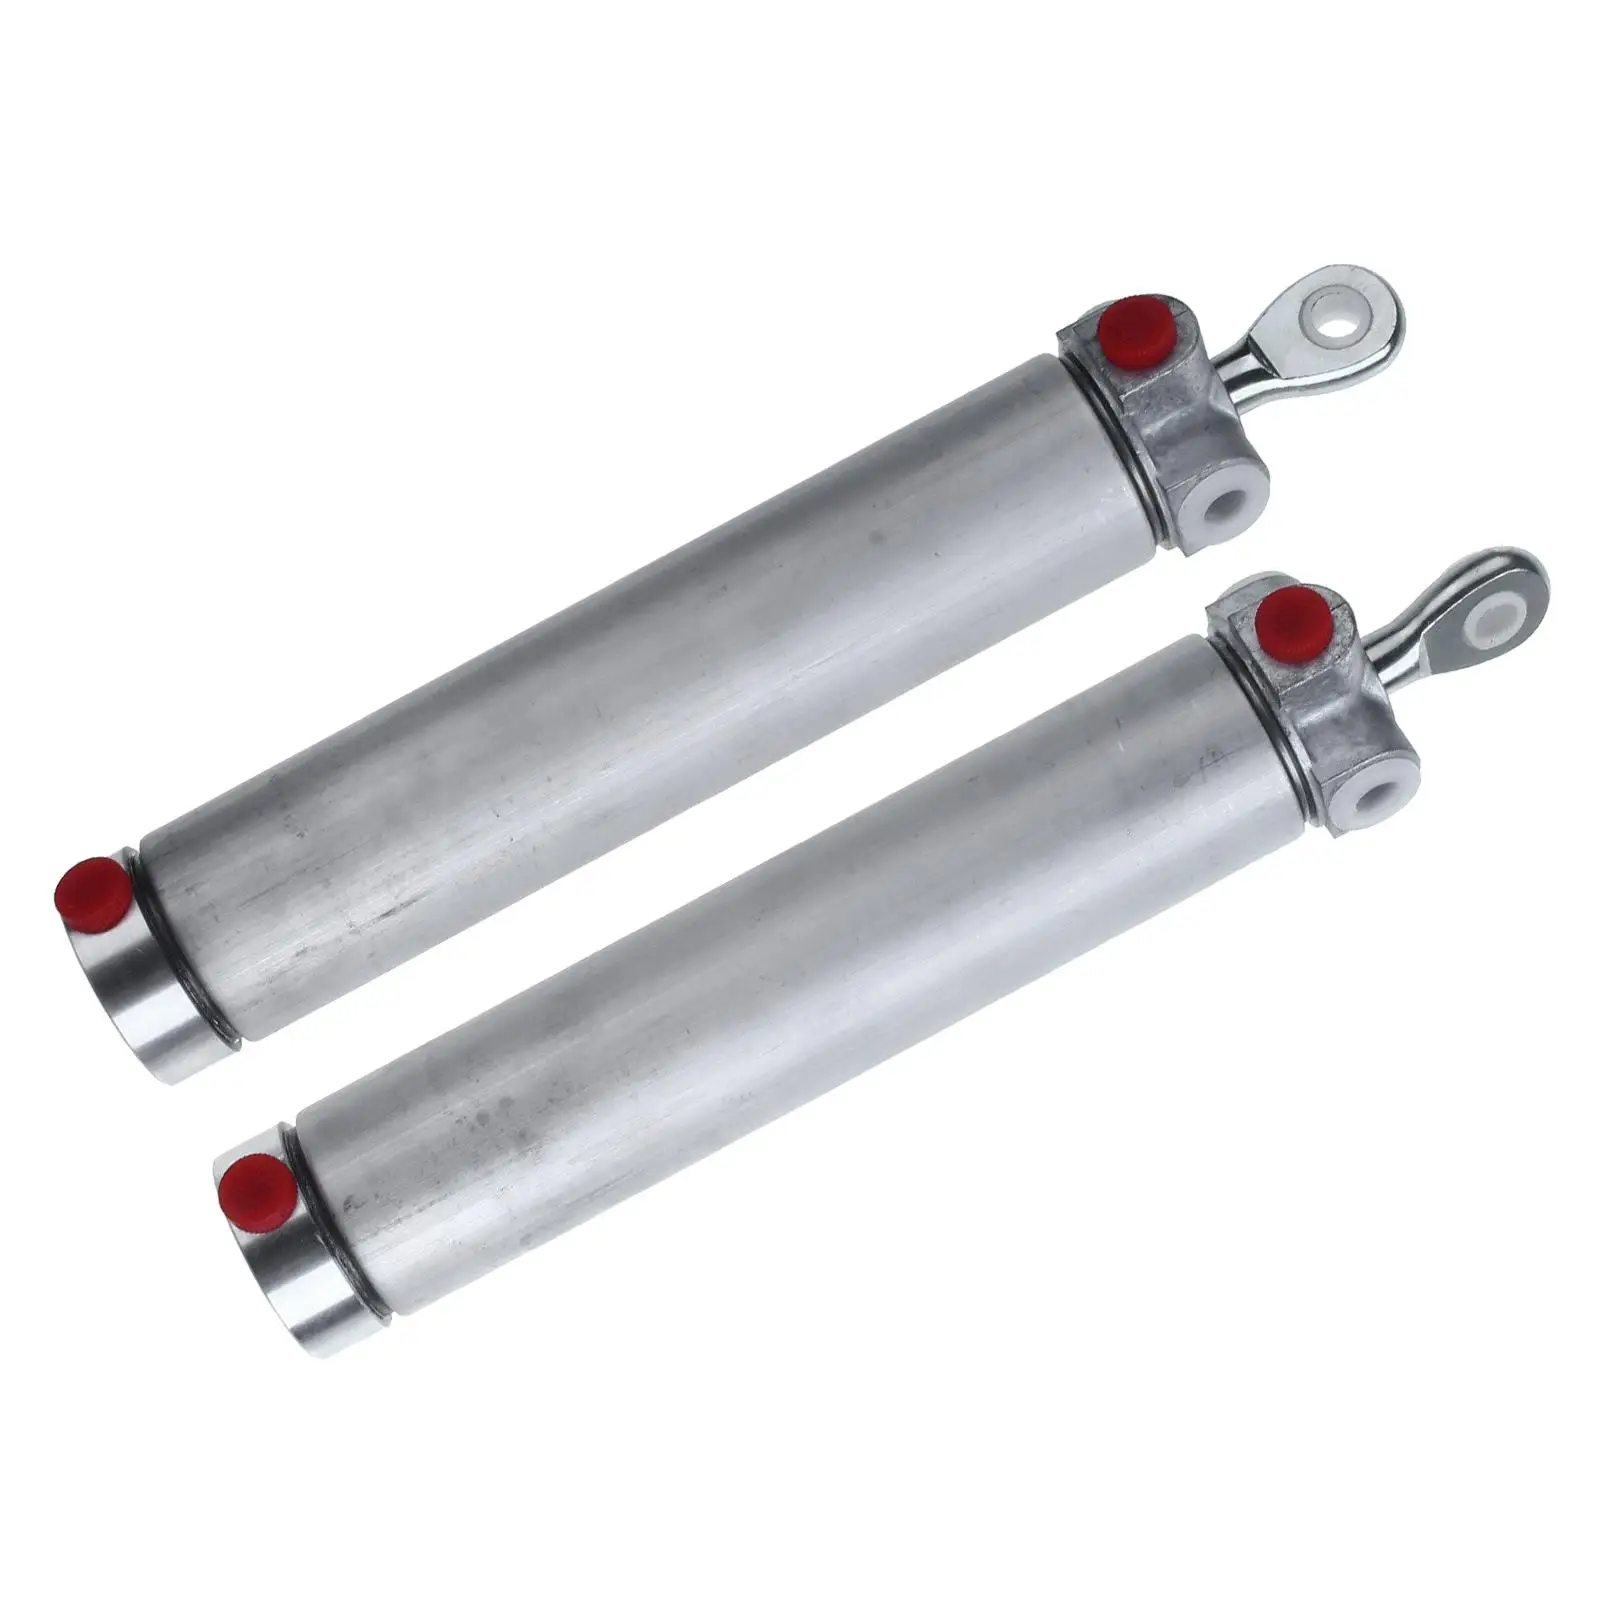 Automobile Convertible Top Hydraulic Cylinders for Ford Mustang TC123 ,for